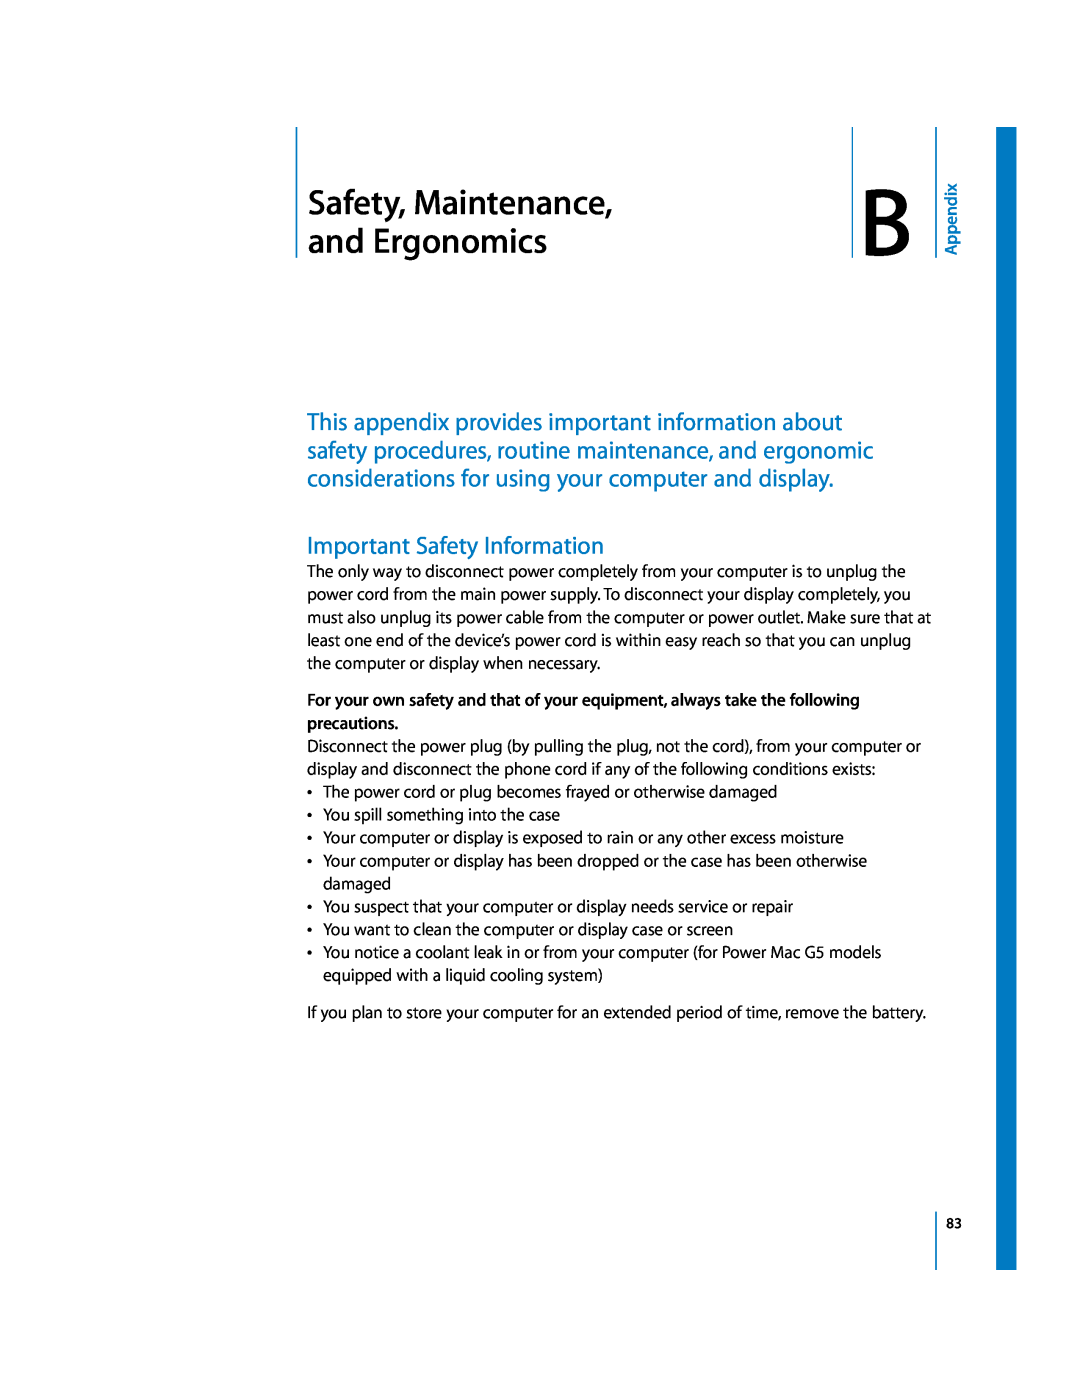 Apple G5 manual and Ergonomics, BSafety, Maintenance, Important Safety Information, Appendix 